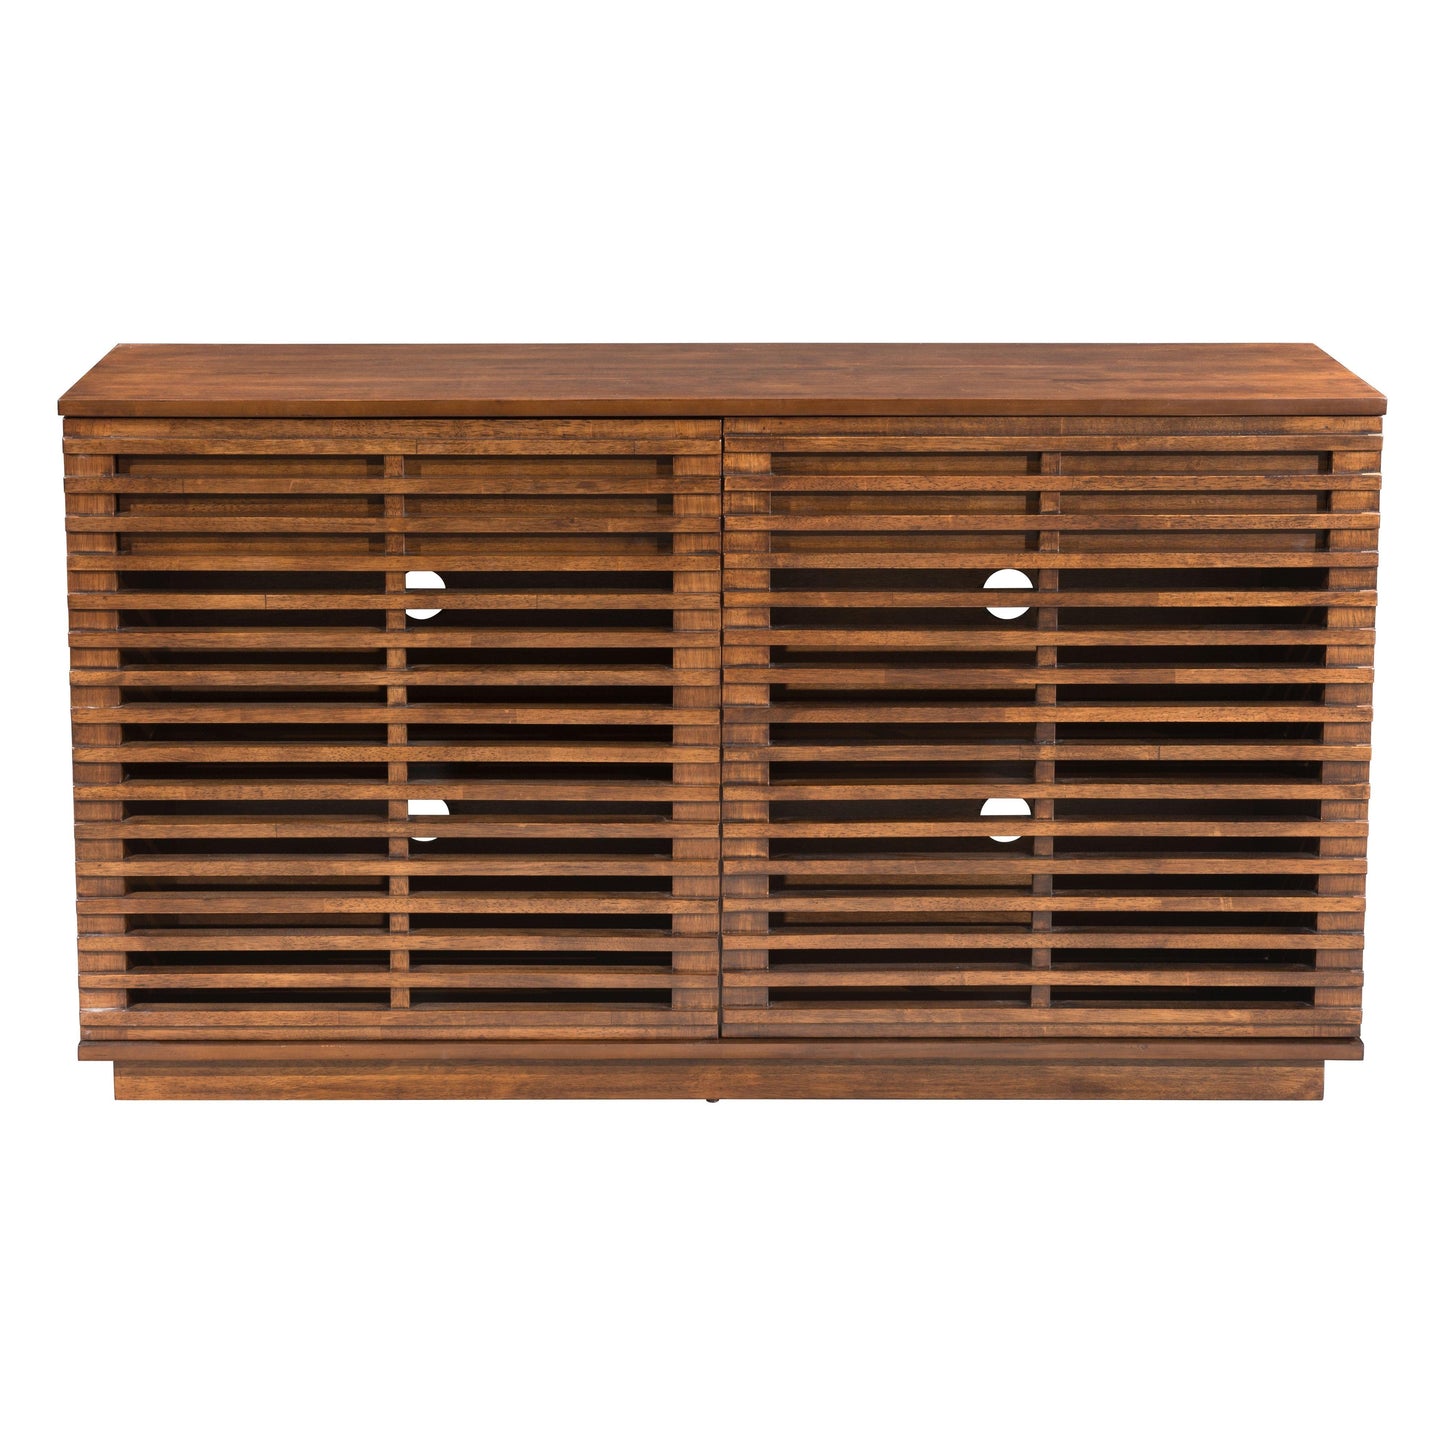 Linea Credenza Walnut - Sideboards and Things Color_Natural, Depth_10-20, Features_With Drawers, Features_With Shelves, Height_30-40, Materials_Wood, Product Type_Credenza, Width_50-60, Wood Species_MDF, Wood Species_Rubberwood